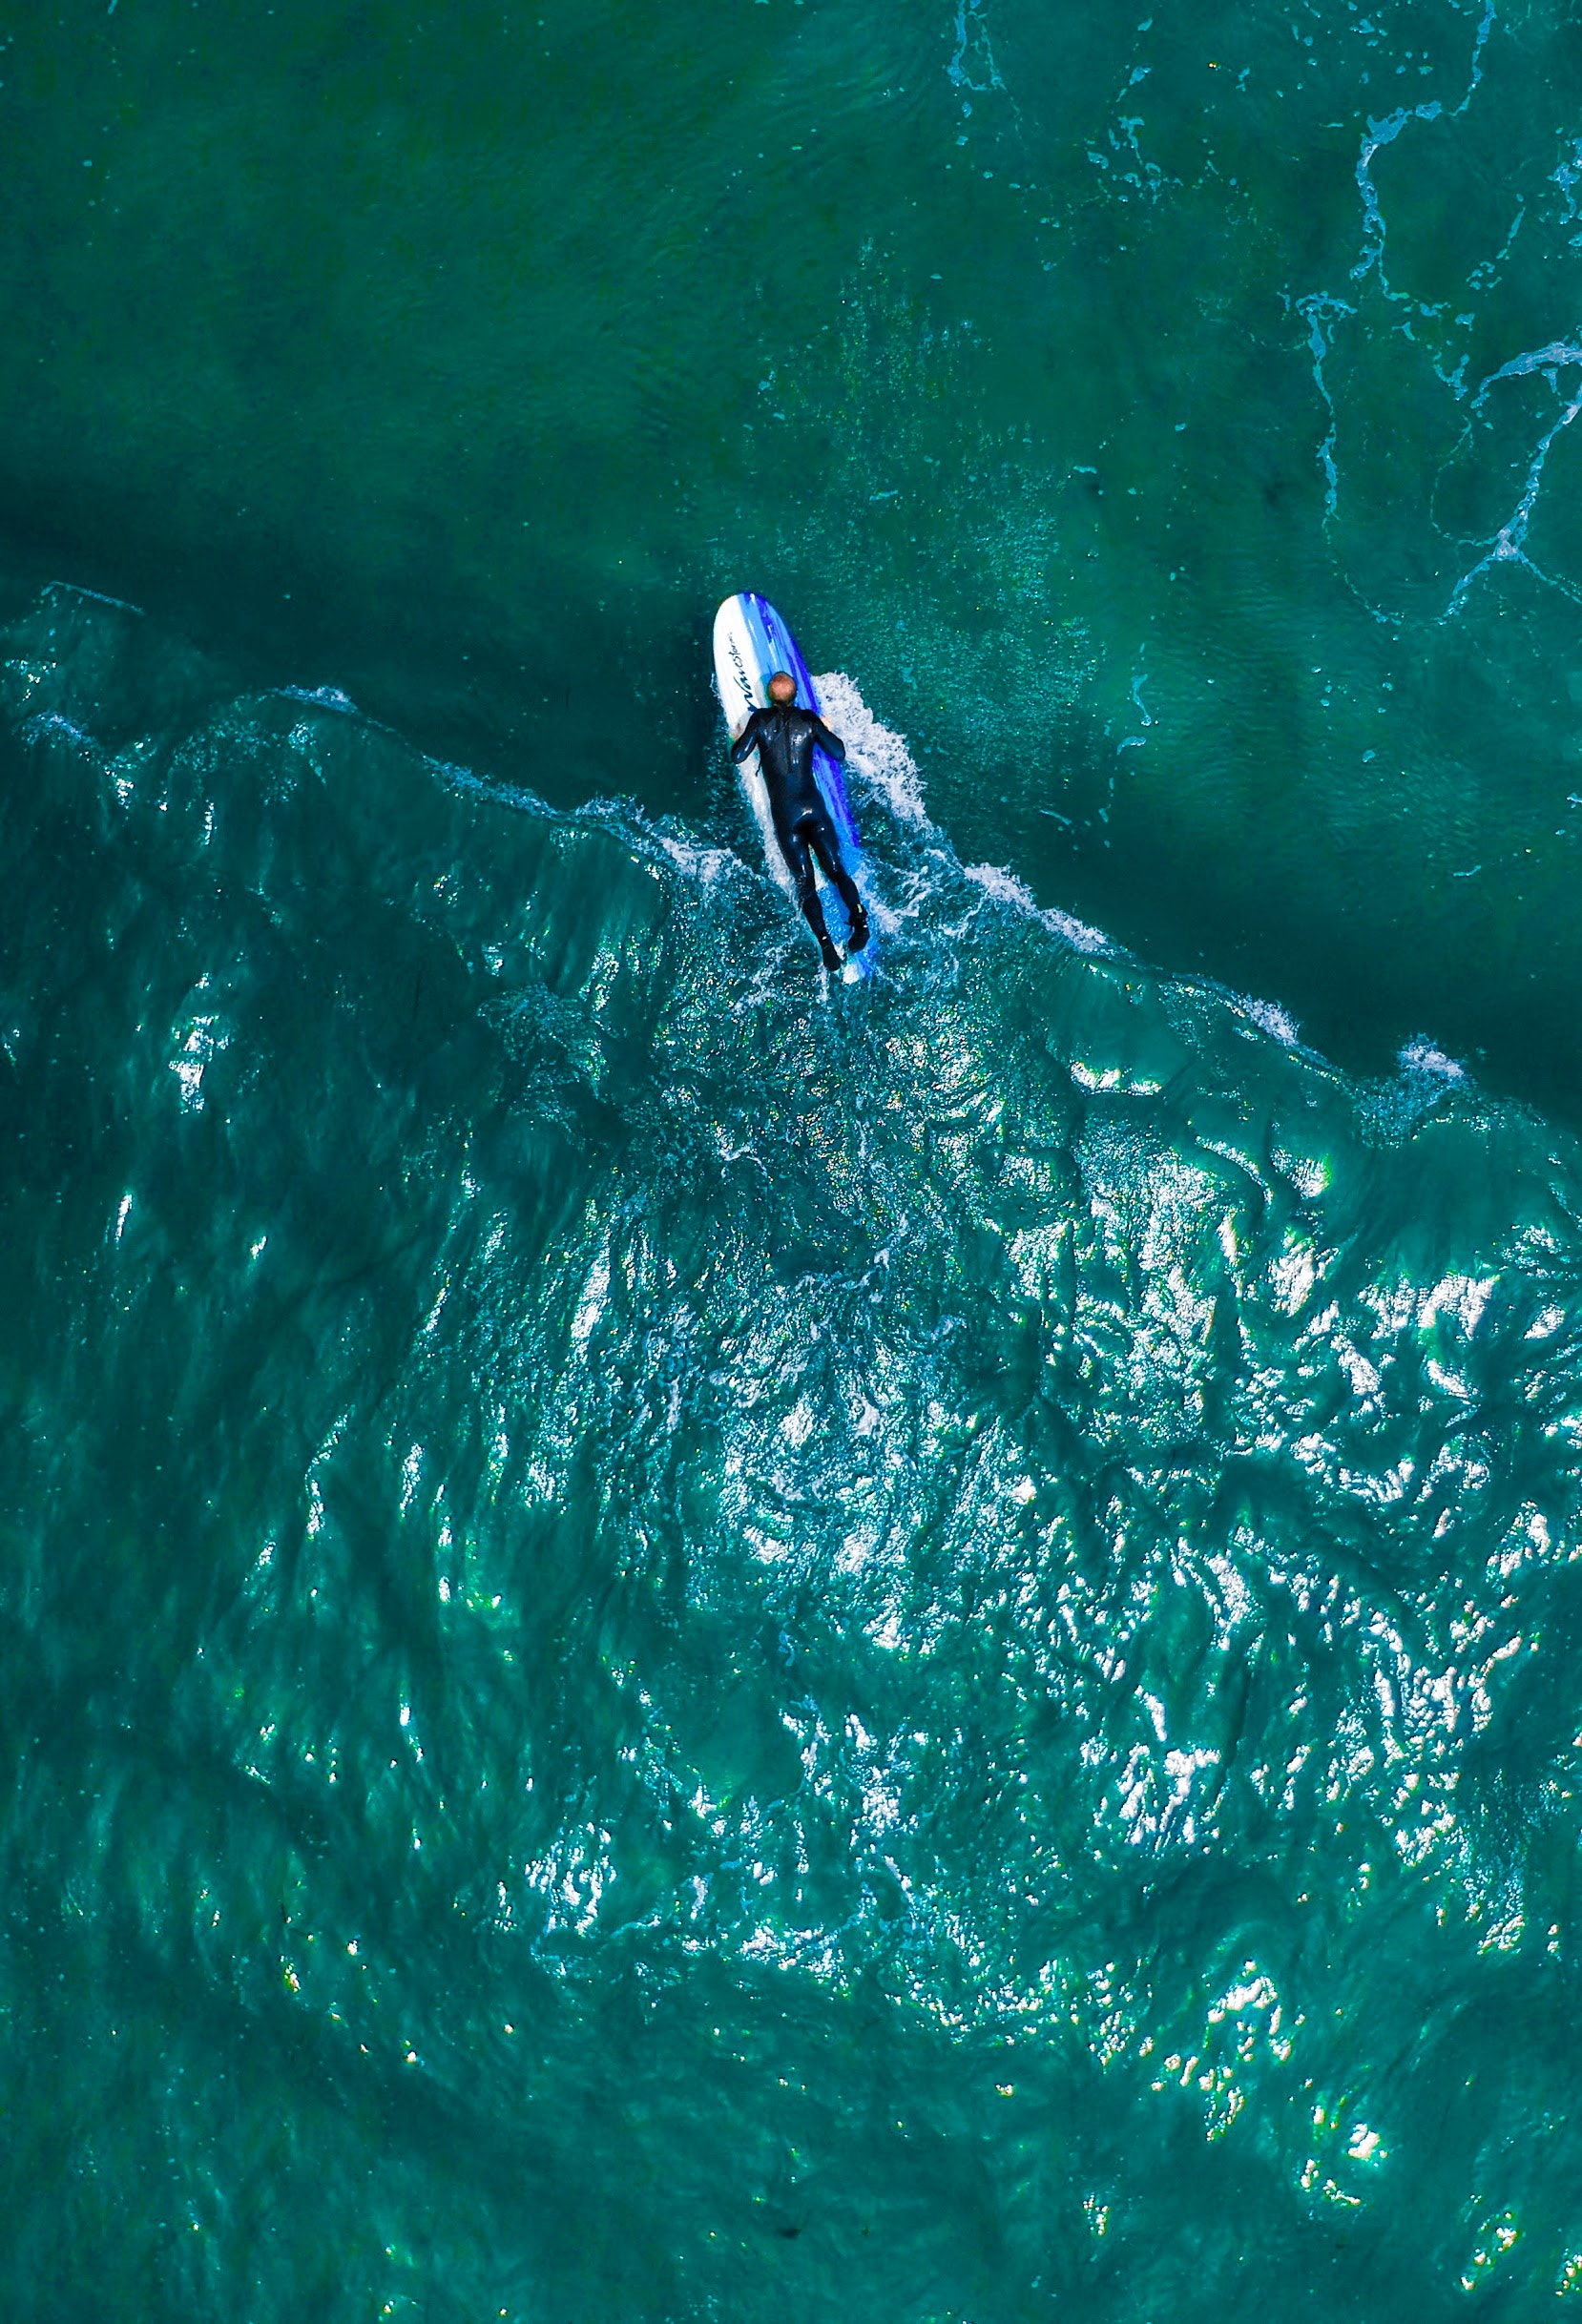 Aerial view of a person on a surfboard